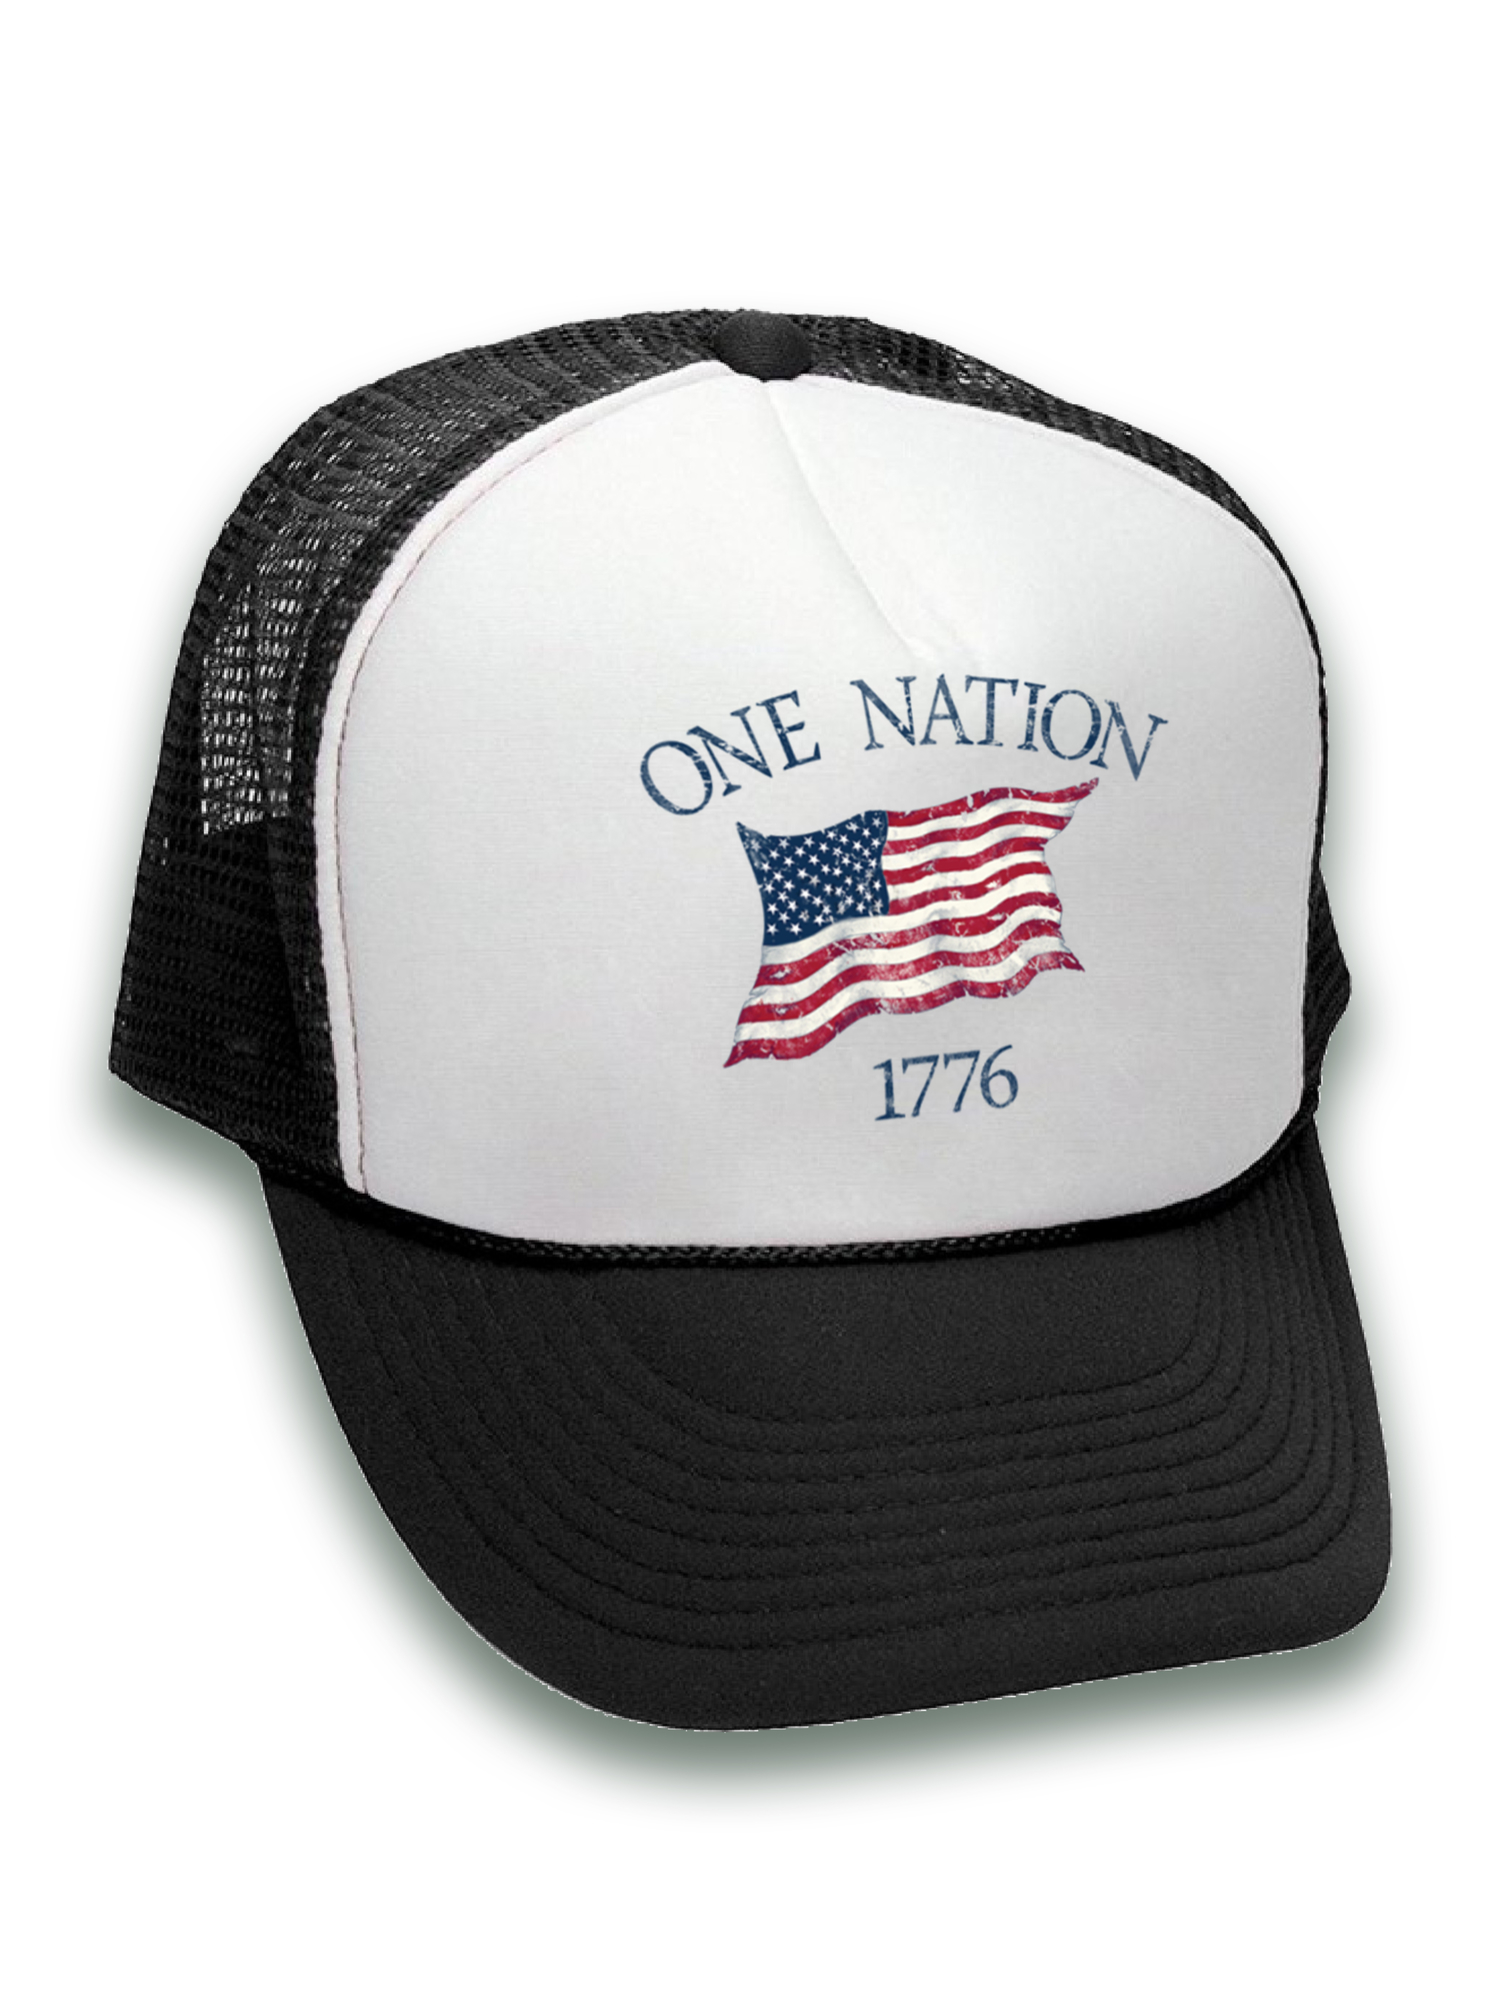 Awkward Styles USA Flag Hat American Trucker Hat One Nation 1776 Proud American Flag Hat USA Baseball Cap Patriotic Hat American Flag Men Women 4th of July Hat 4th of July Accessories - image 2 of 6